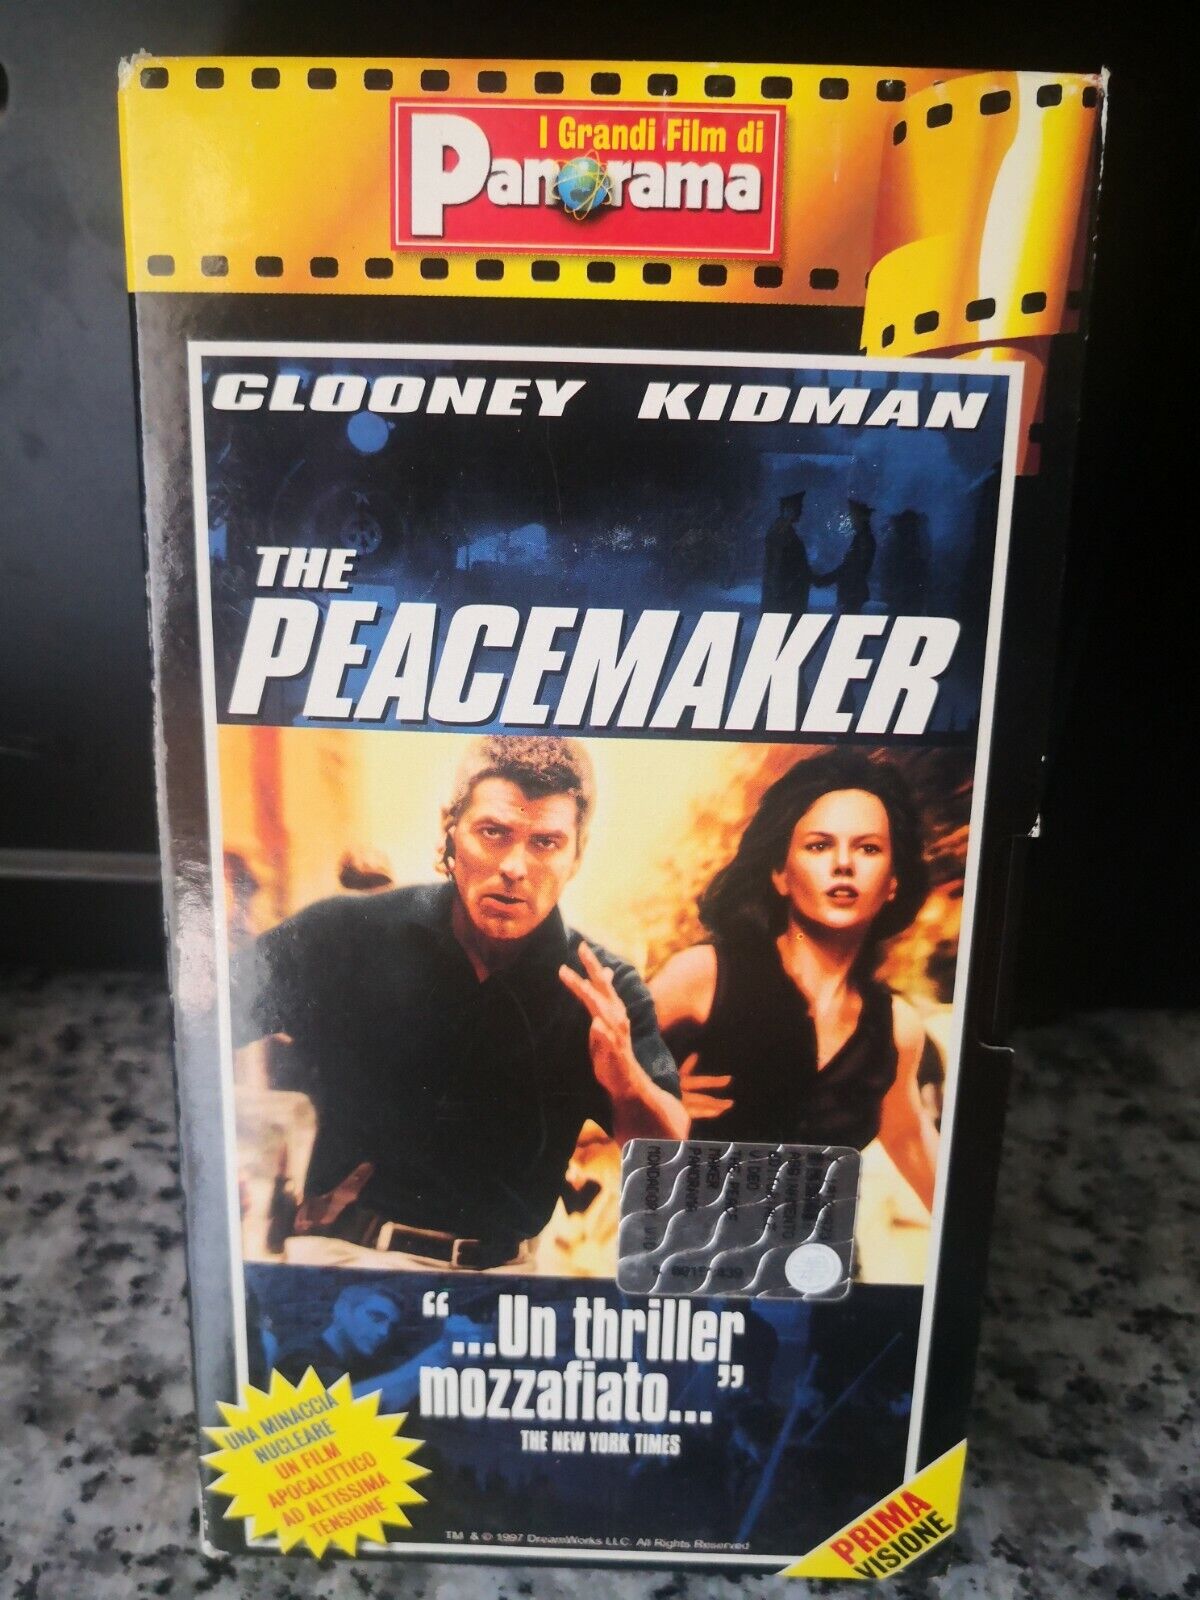 The peacemaker  - vhs - 1997 - Panorama -F